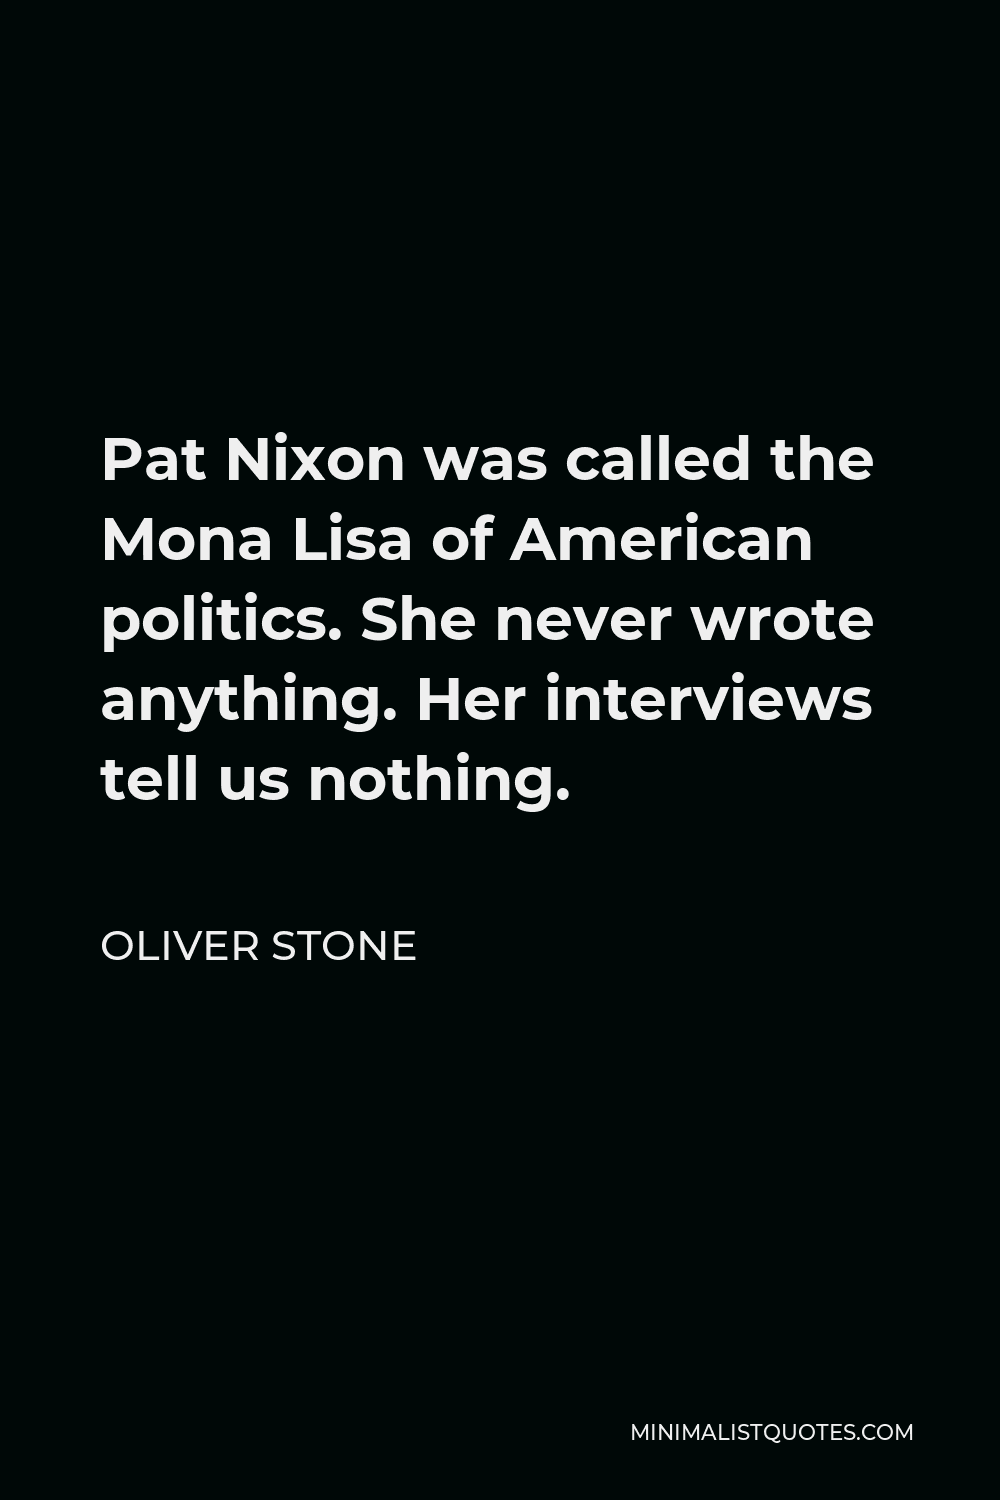 Oliver Stone Quote - Pat Nixon was called the Mona Lisa of American politics. She never wrote anything. Her interviews tell us nothing.